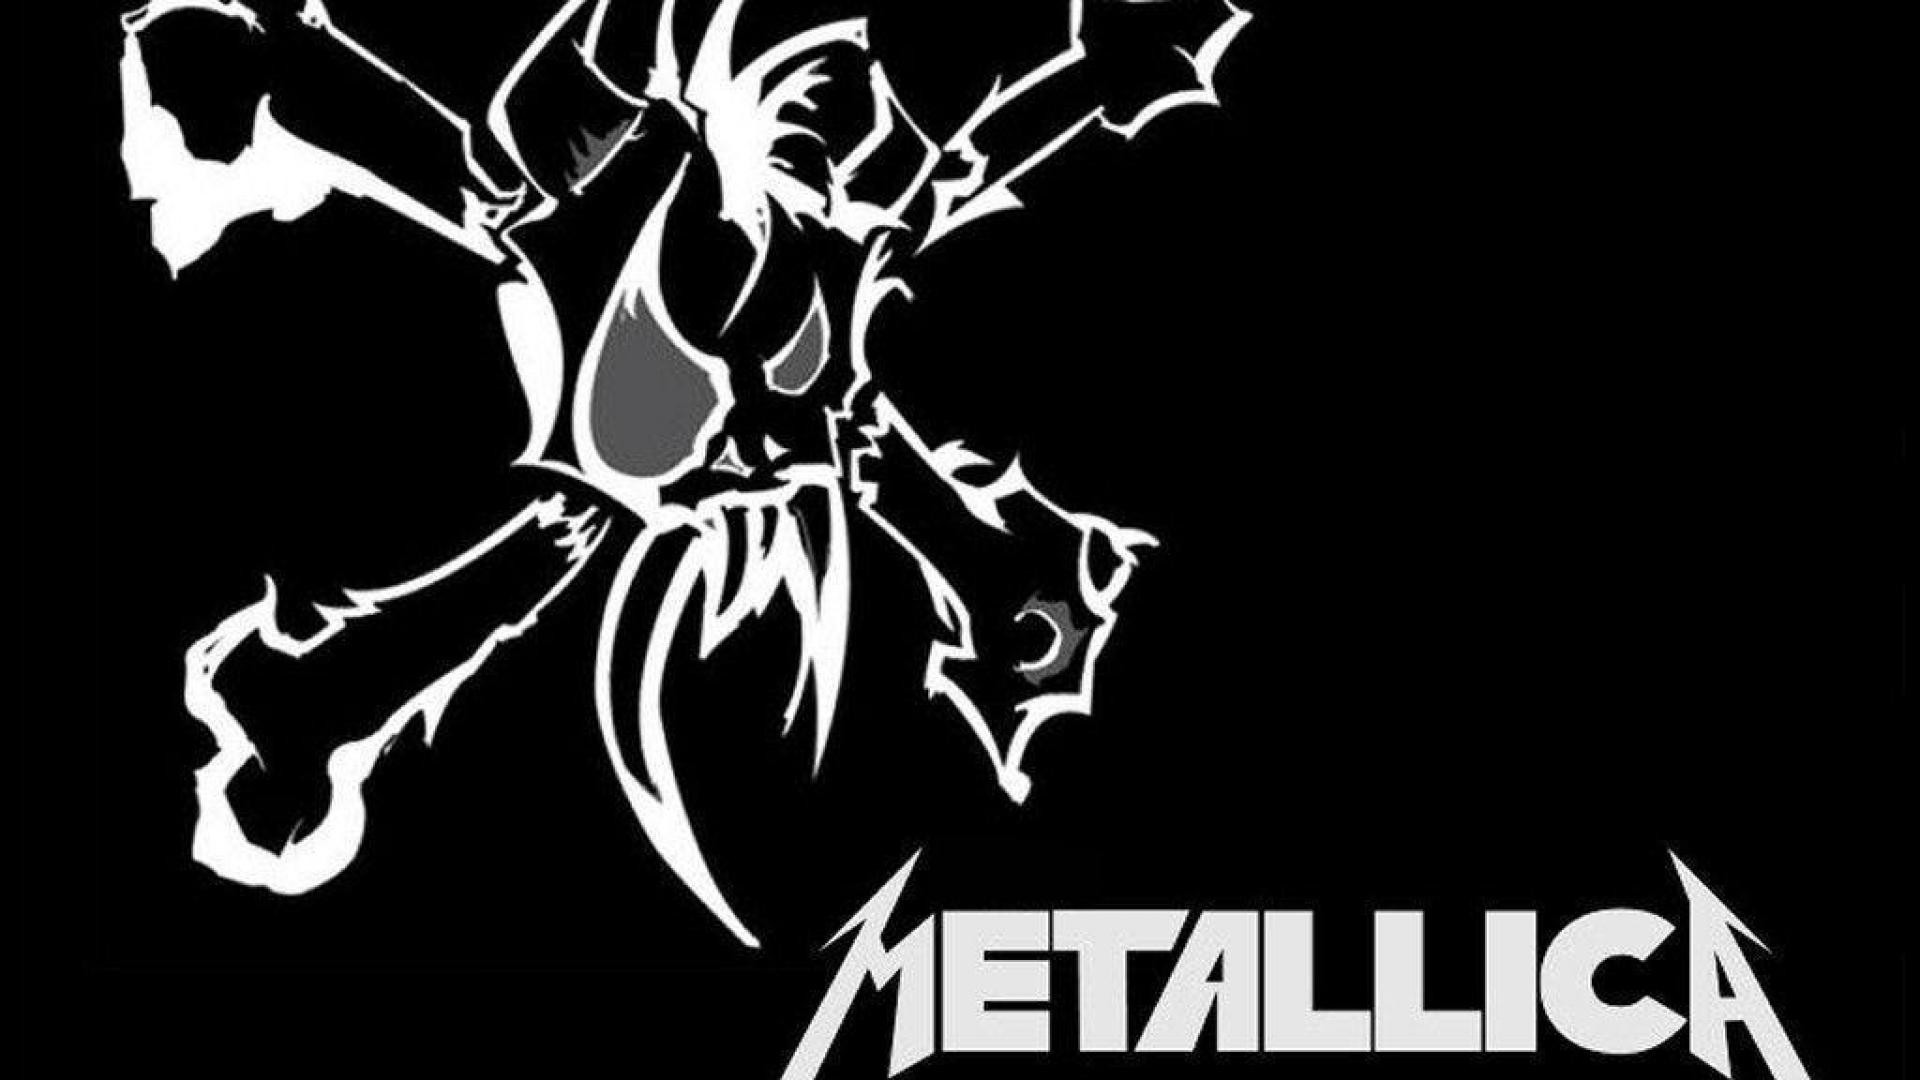 Metallica HD Wallpapers and Backgrounds 19201080 Metalica Wallpapers 40 Wallpapers Adorable